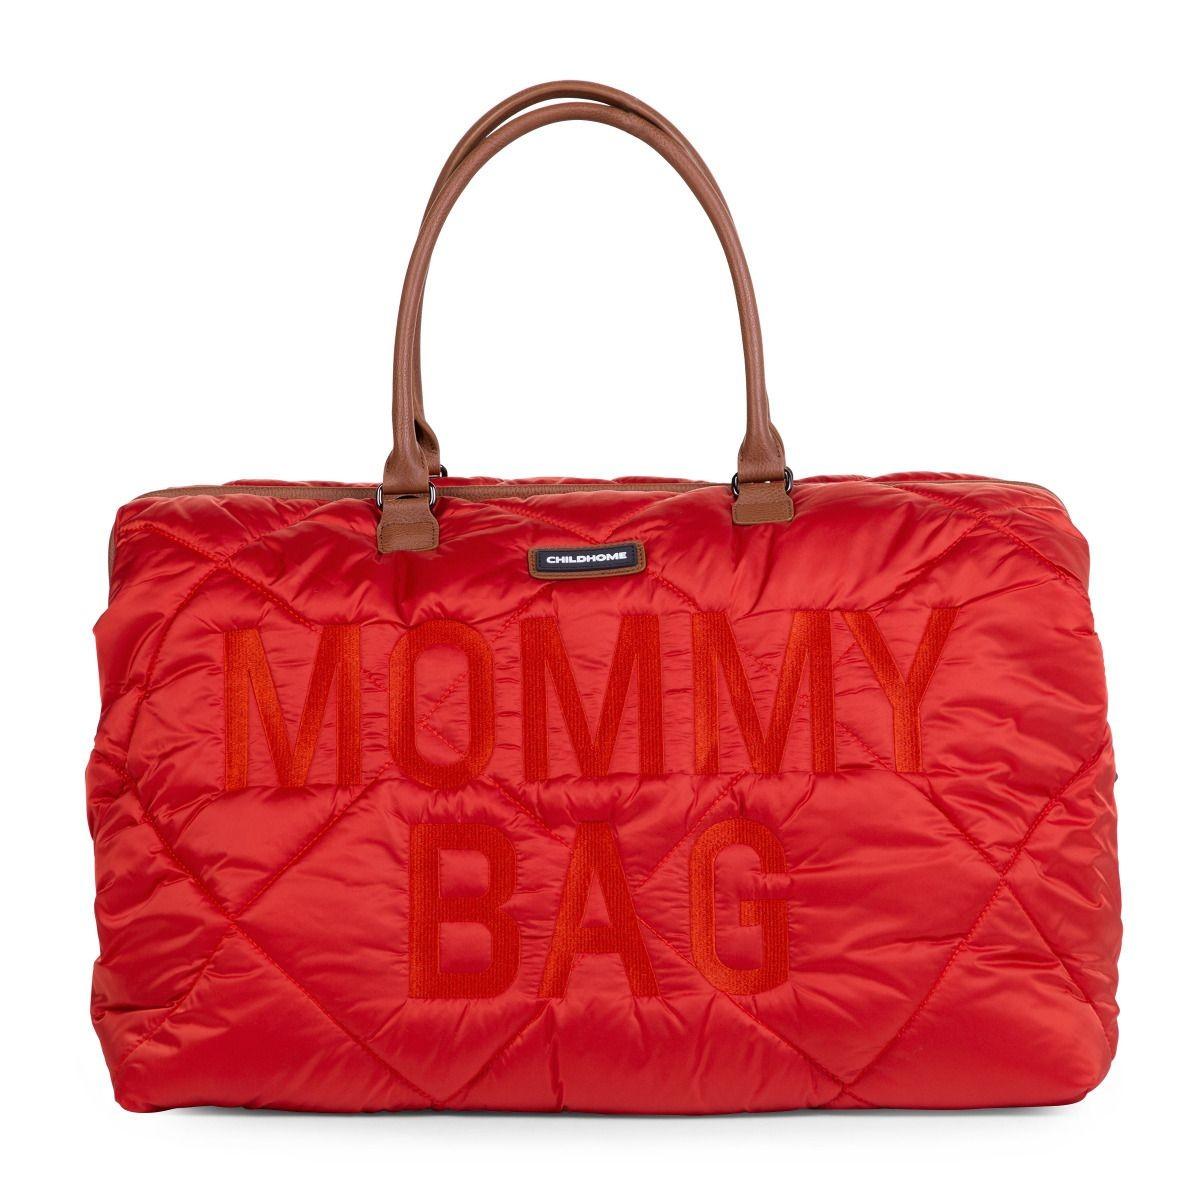 Childhome - Mommy bag puffered red